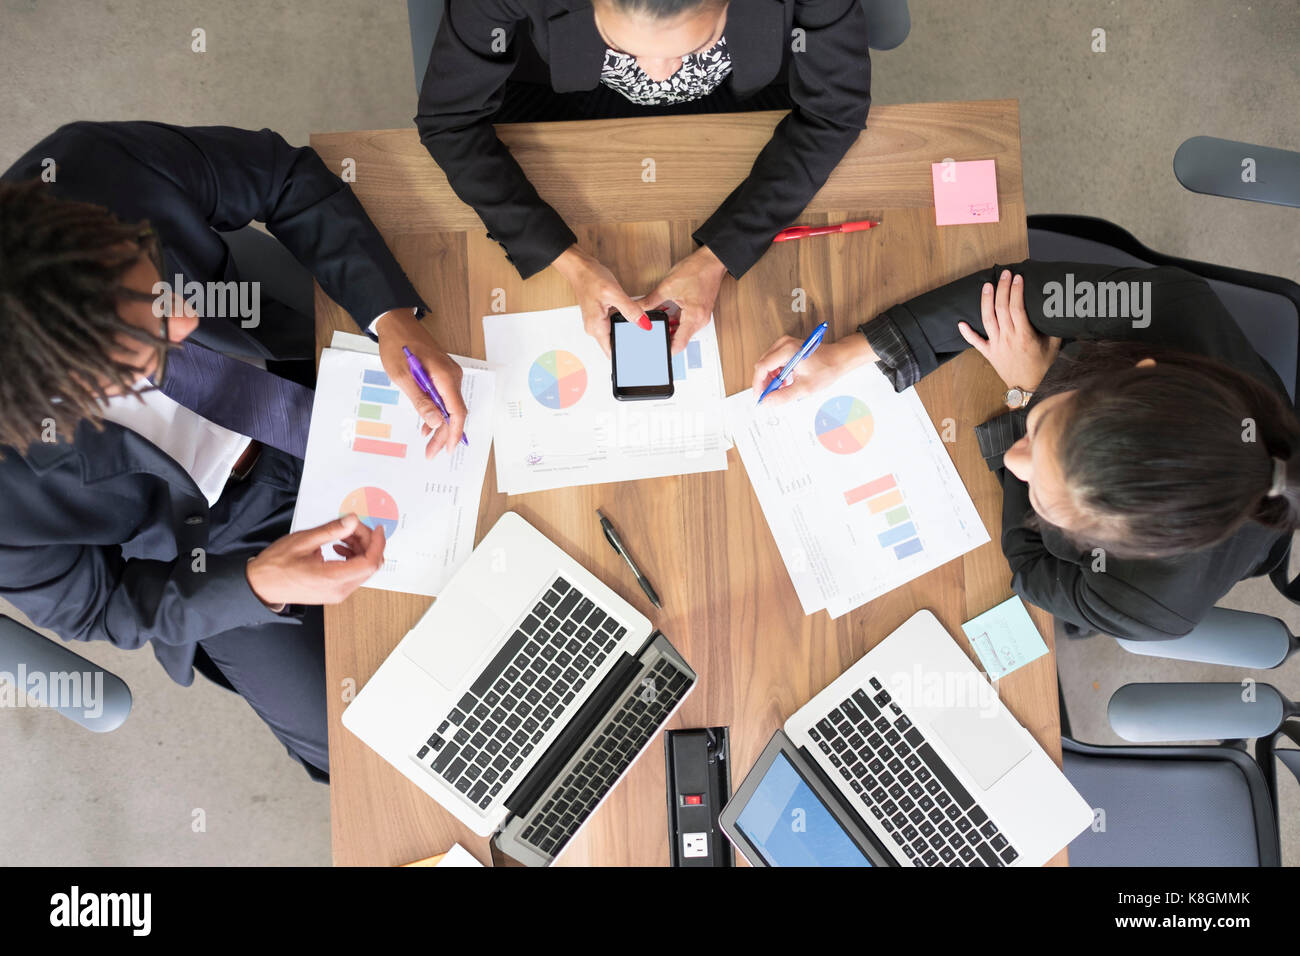 Businessman and businesswomen, in office meeting, using laptops, looking at data, overhead view Stock Photo